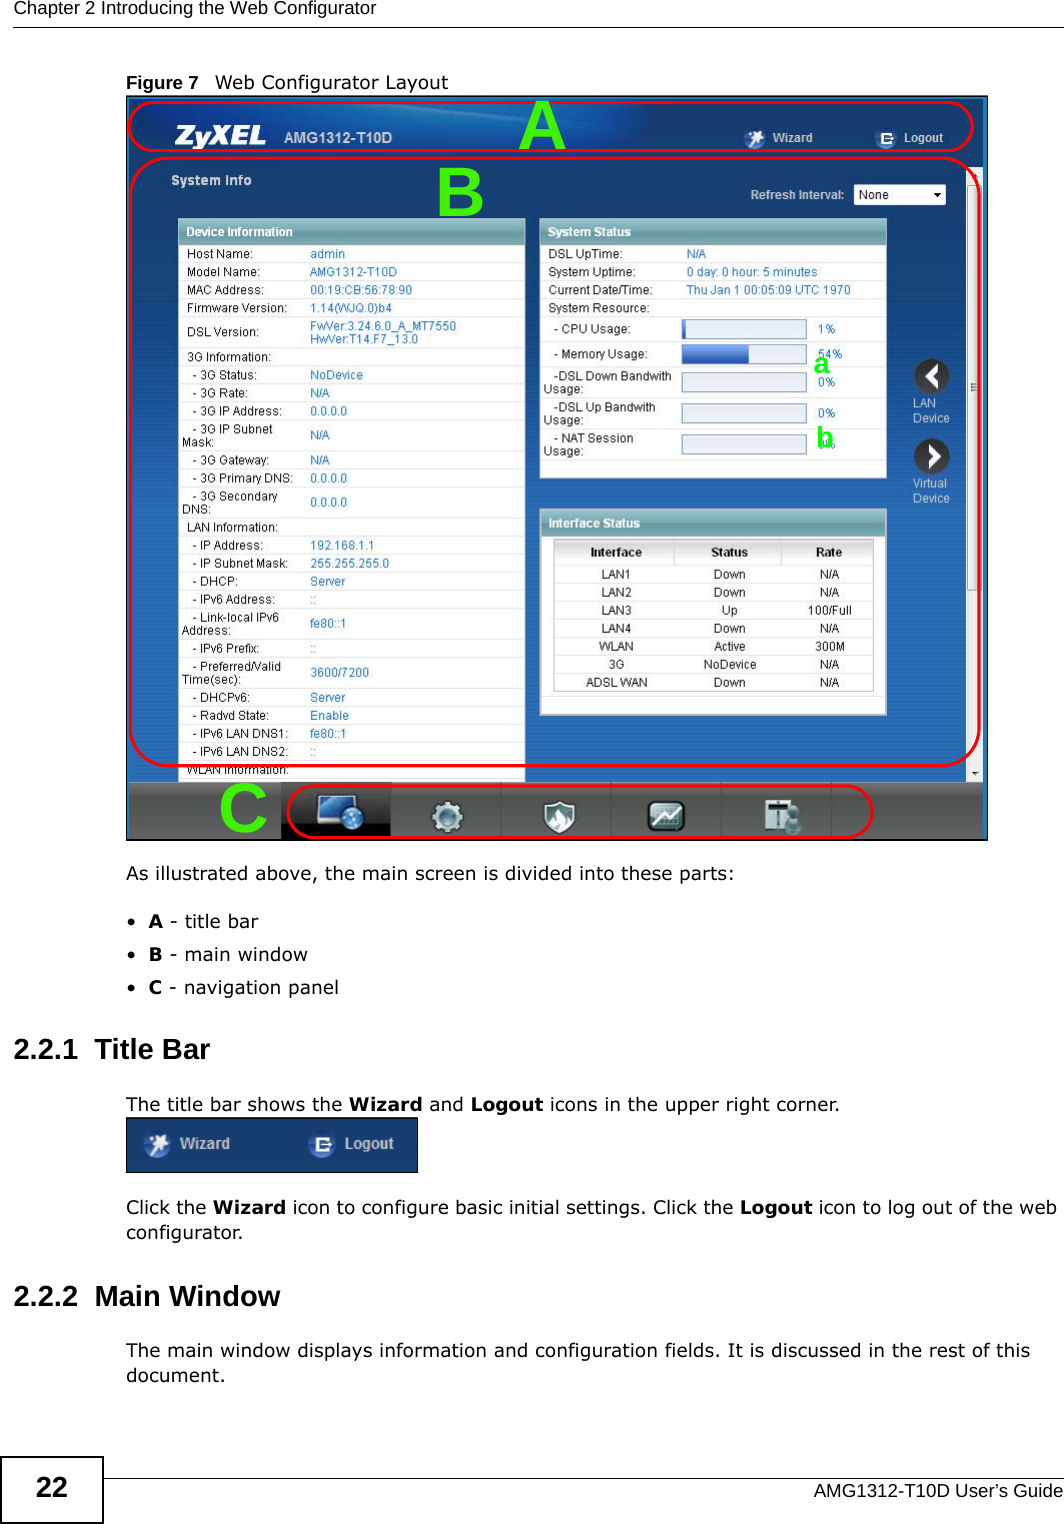 Chapter 2 Introducing the Web ConfiguratorAMG1312-T10D User’s Guide22Figure 7   Web Configurator LayoutAs illustrated above, the main screen is divided into these parts:•A - title bar•B - main window •C - navigation panel2.2.1  Title BarThe title bar shows the Wizard and Logout icons in the upper right corner.Click the Wizard icon to configure basic initial settings. Click the Logout icon to log out of the web configurator.2.2.2  Main WindowThe main window displays information and configuration fields. It is discussed in the rest of this document.BCAab